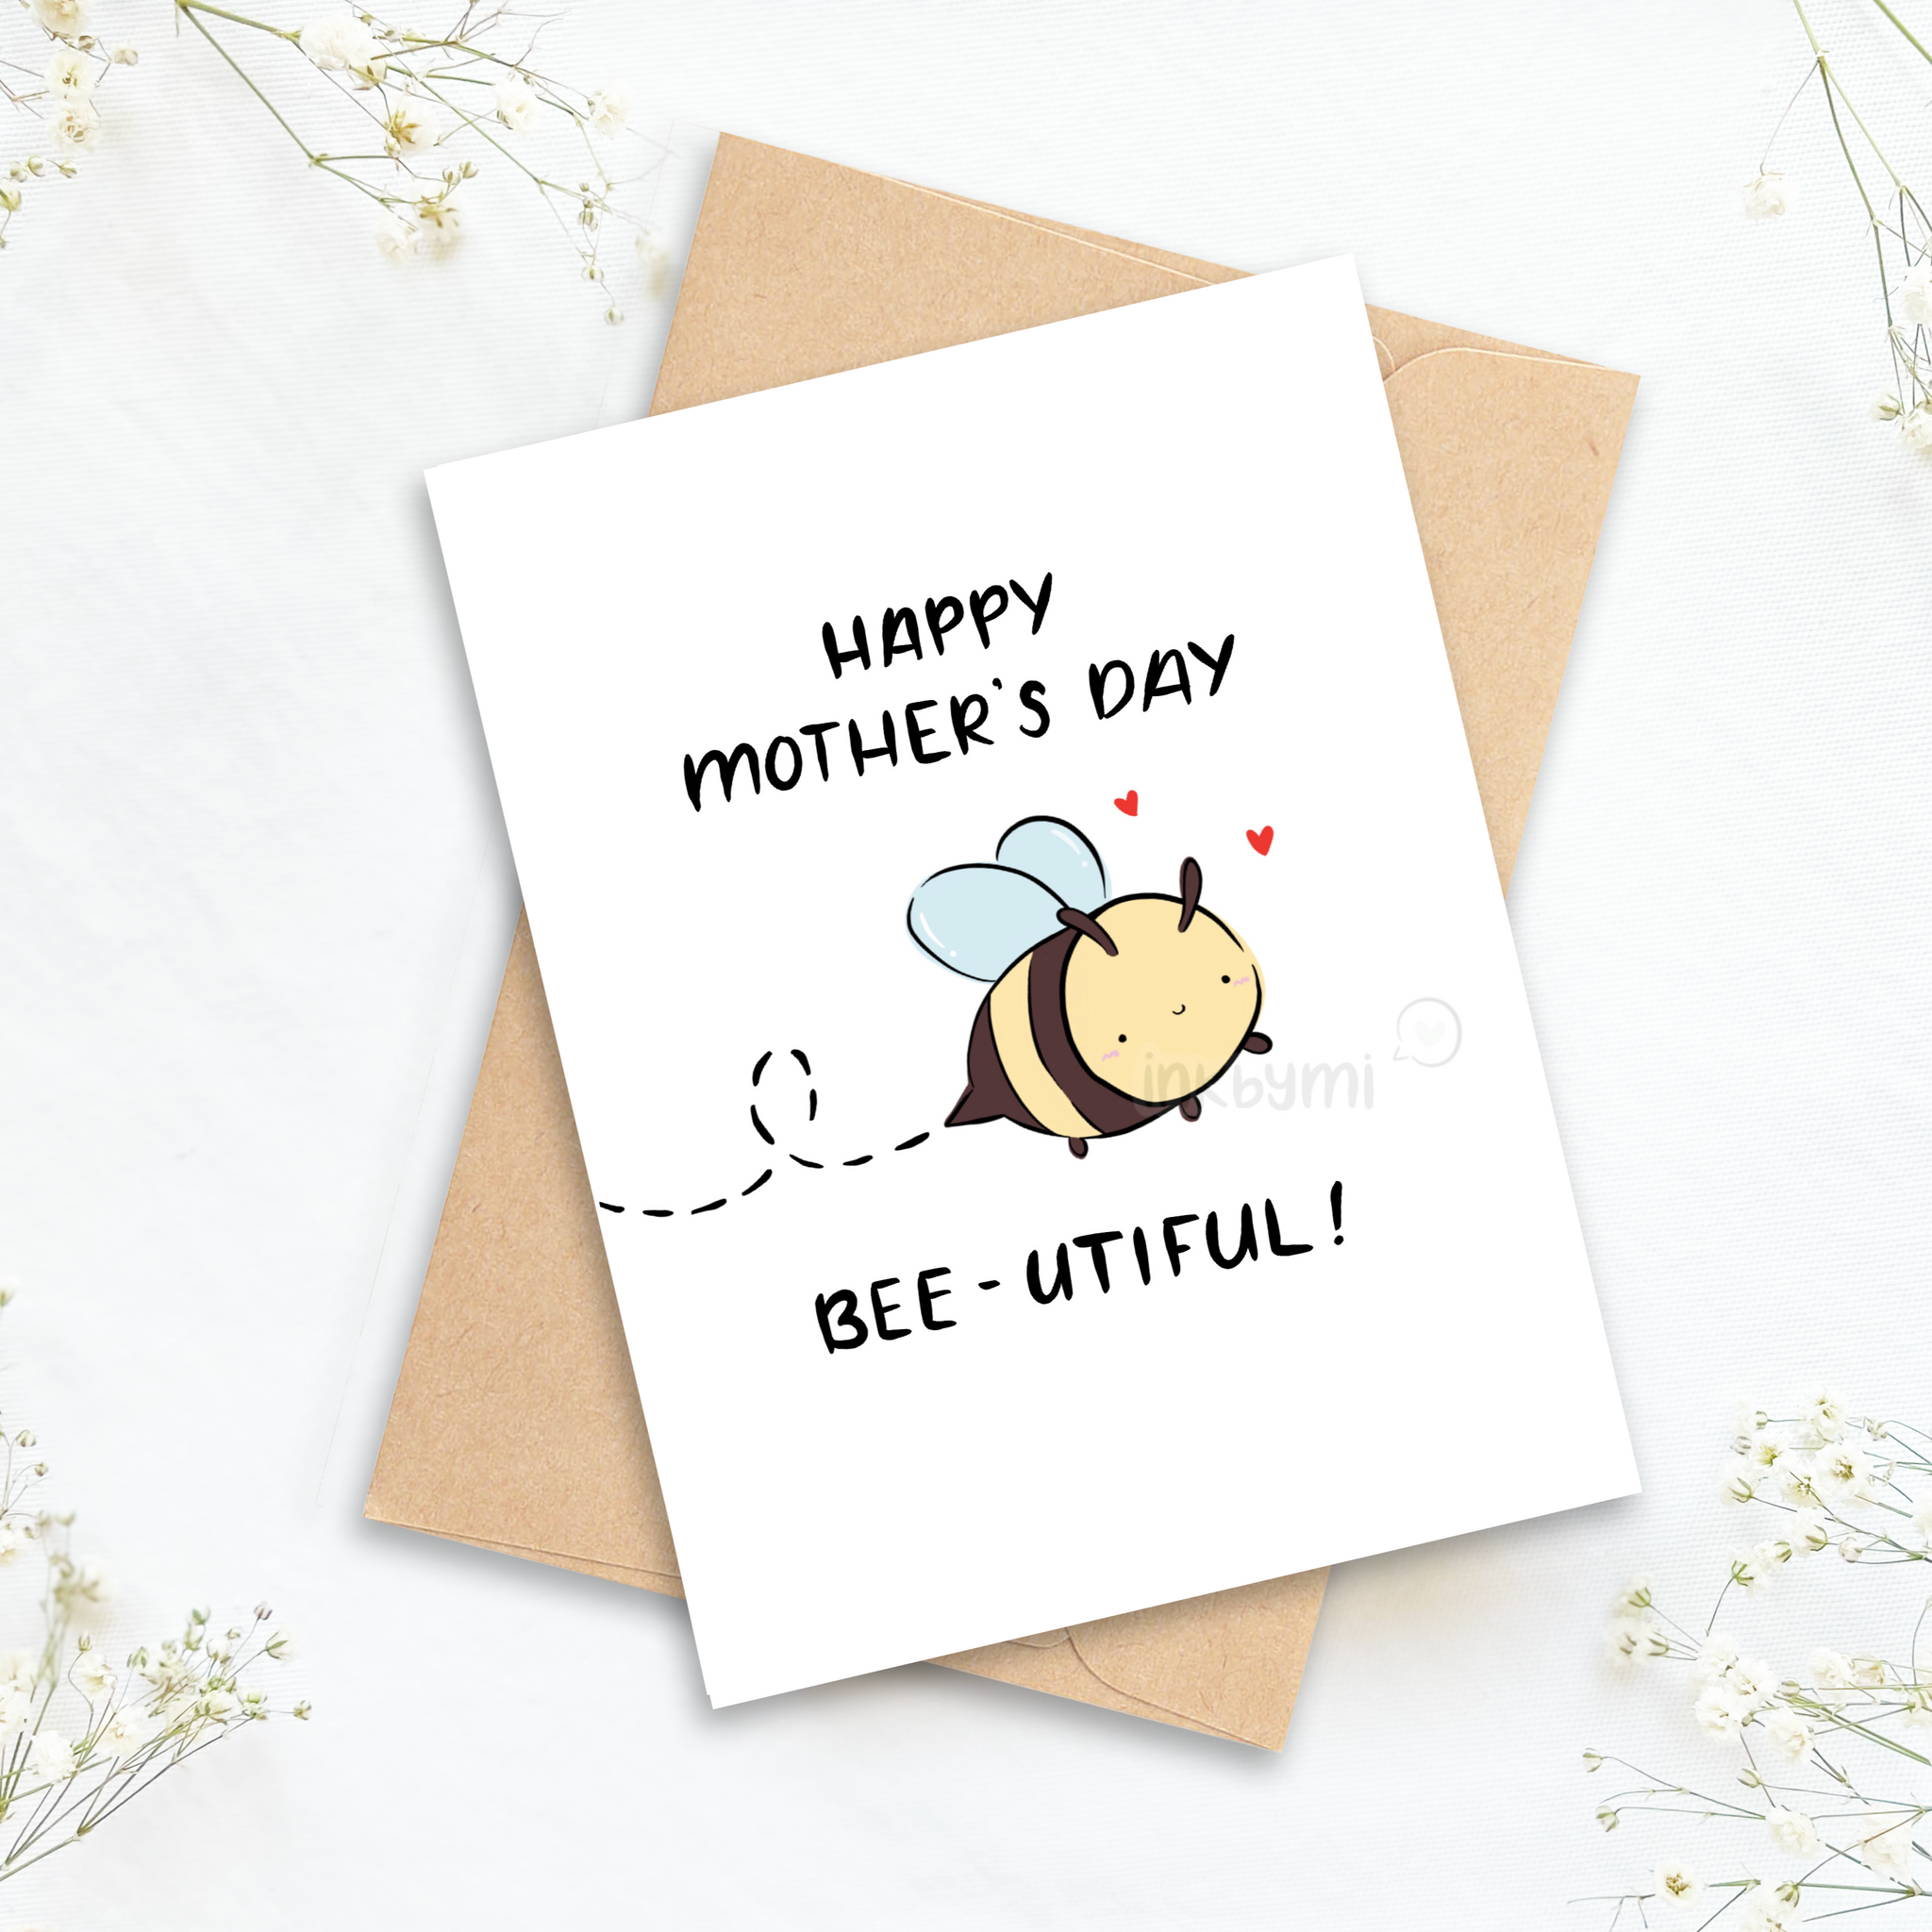 Happy Mother's Day Bee-utiful!